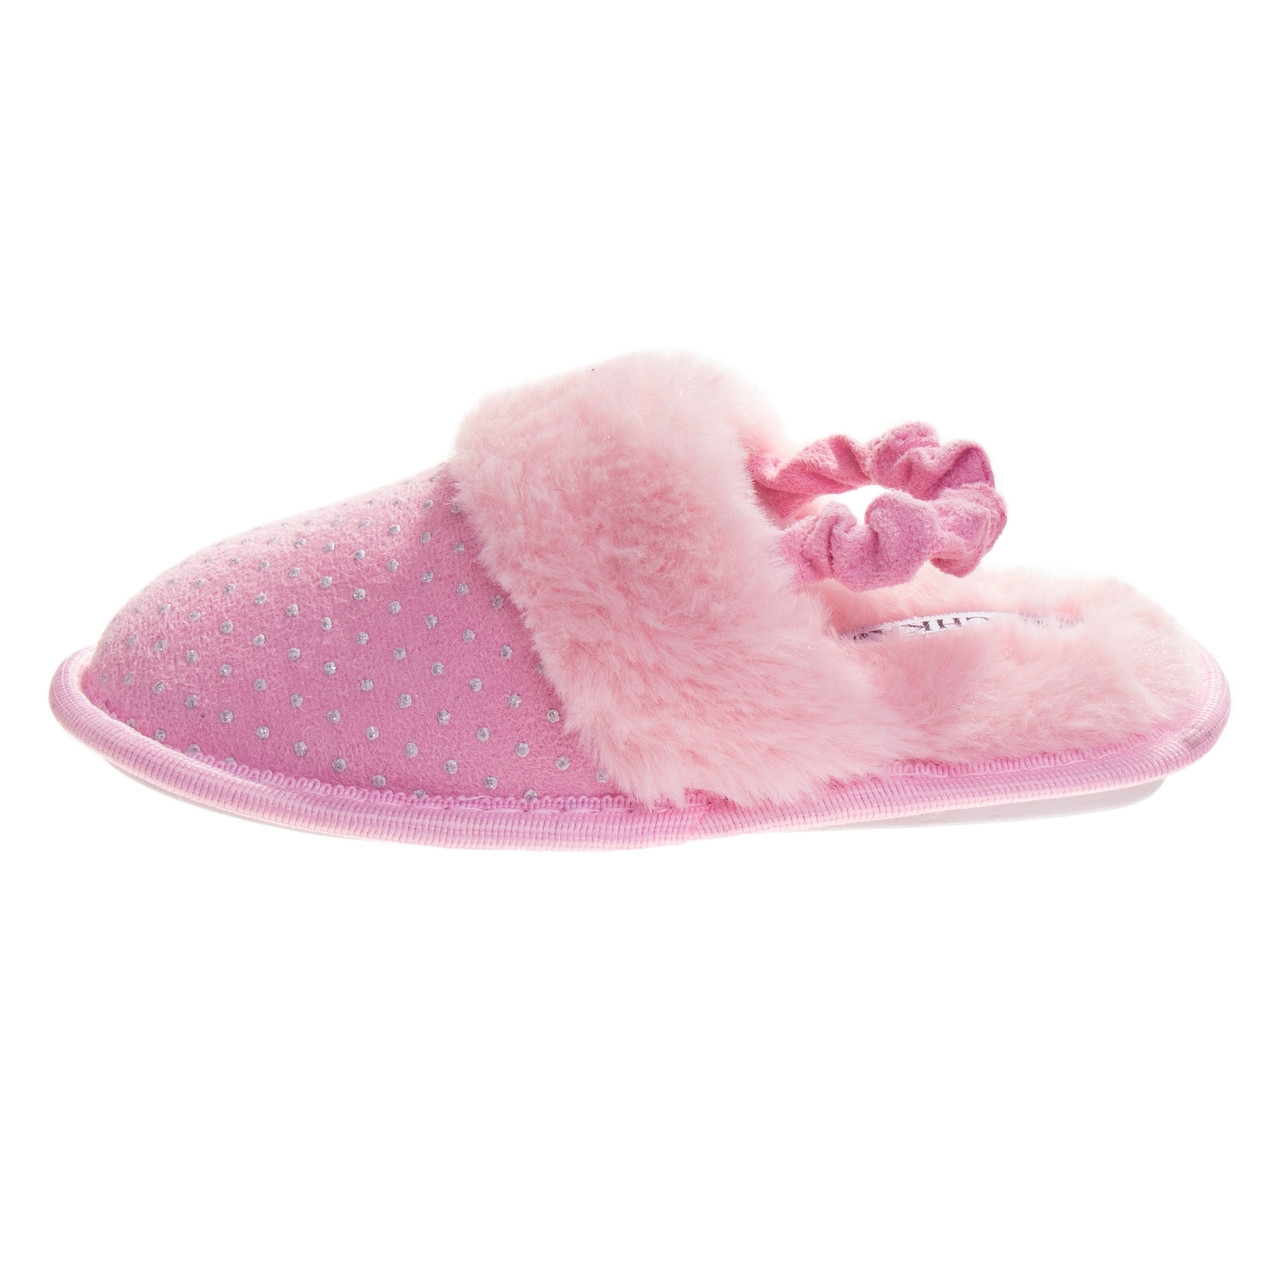 Girls' Faux-Fur Slippers with Backstrap by Badgley Mishcka